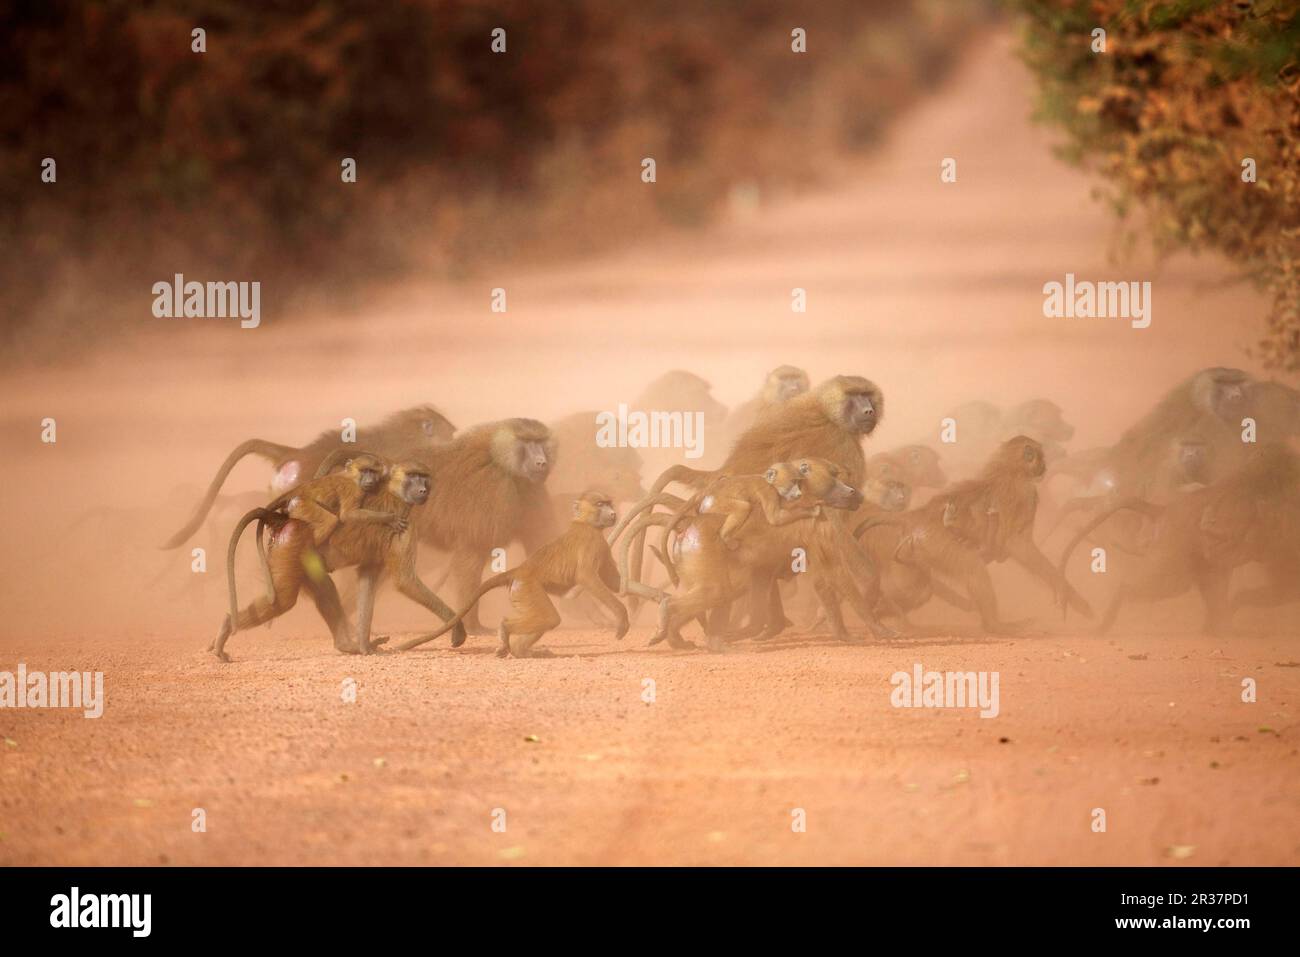 Guinea baboon (Papio papio) adult male, adult female carrying babies and young, group crossing dusty dirt road, Gambia Stock Photo